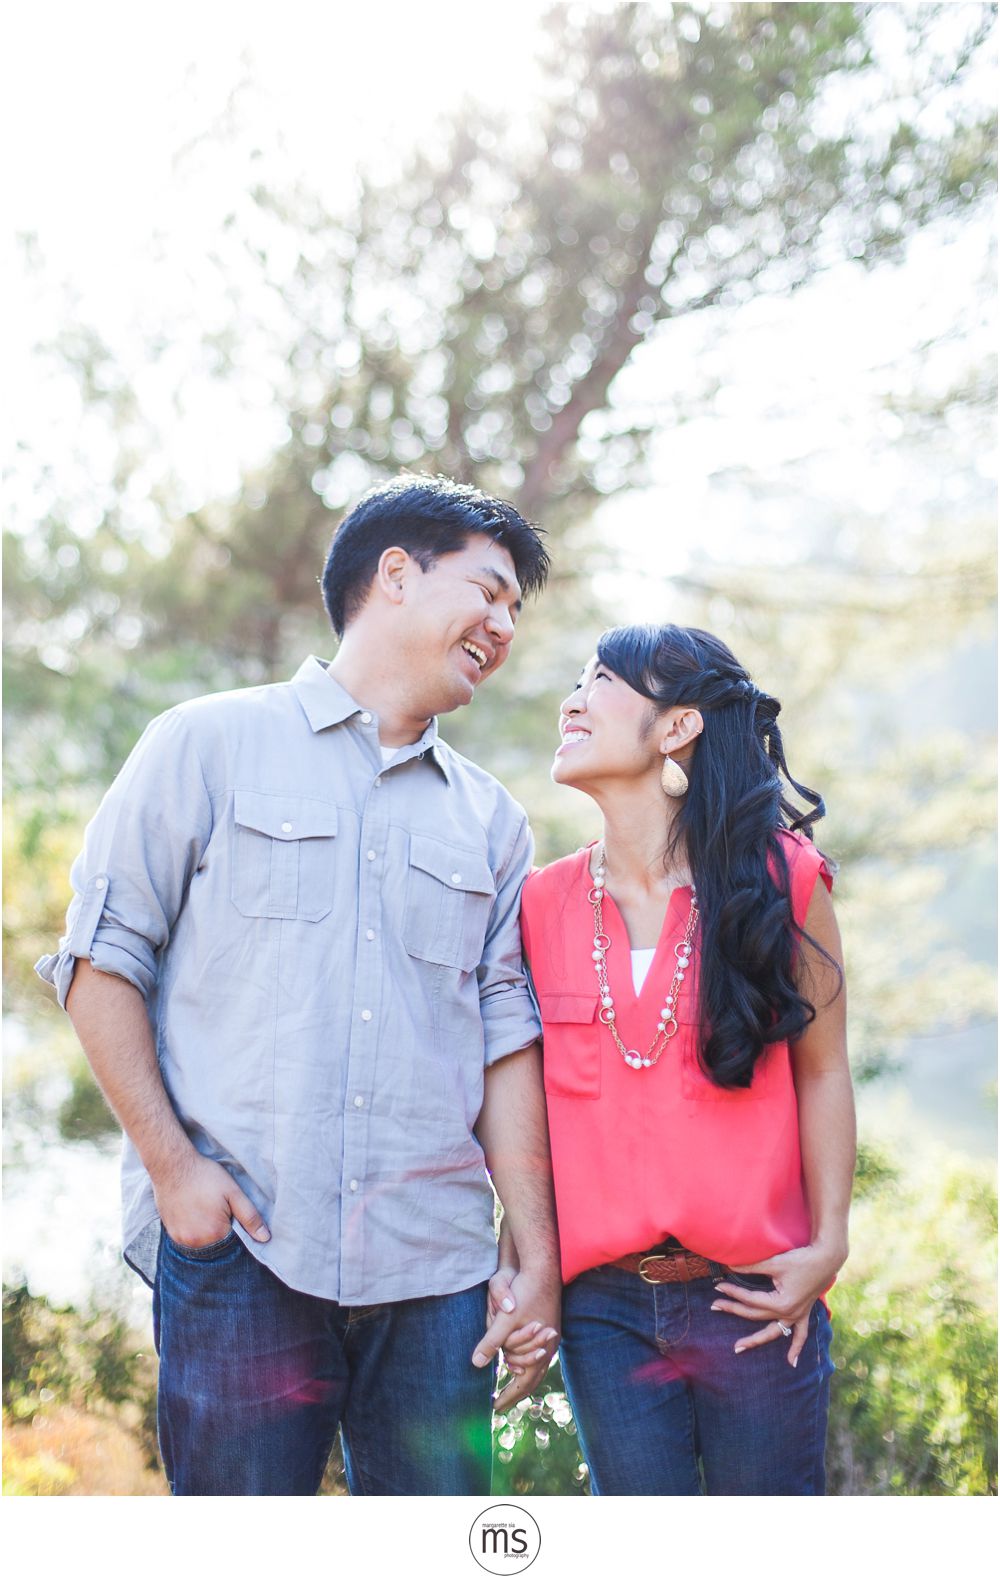 Sarah & Charles Engagement Portraits at Franklin Canyon Park Margarette Sia Photography_0022